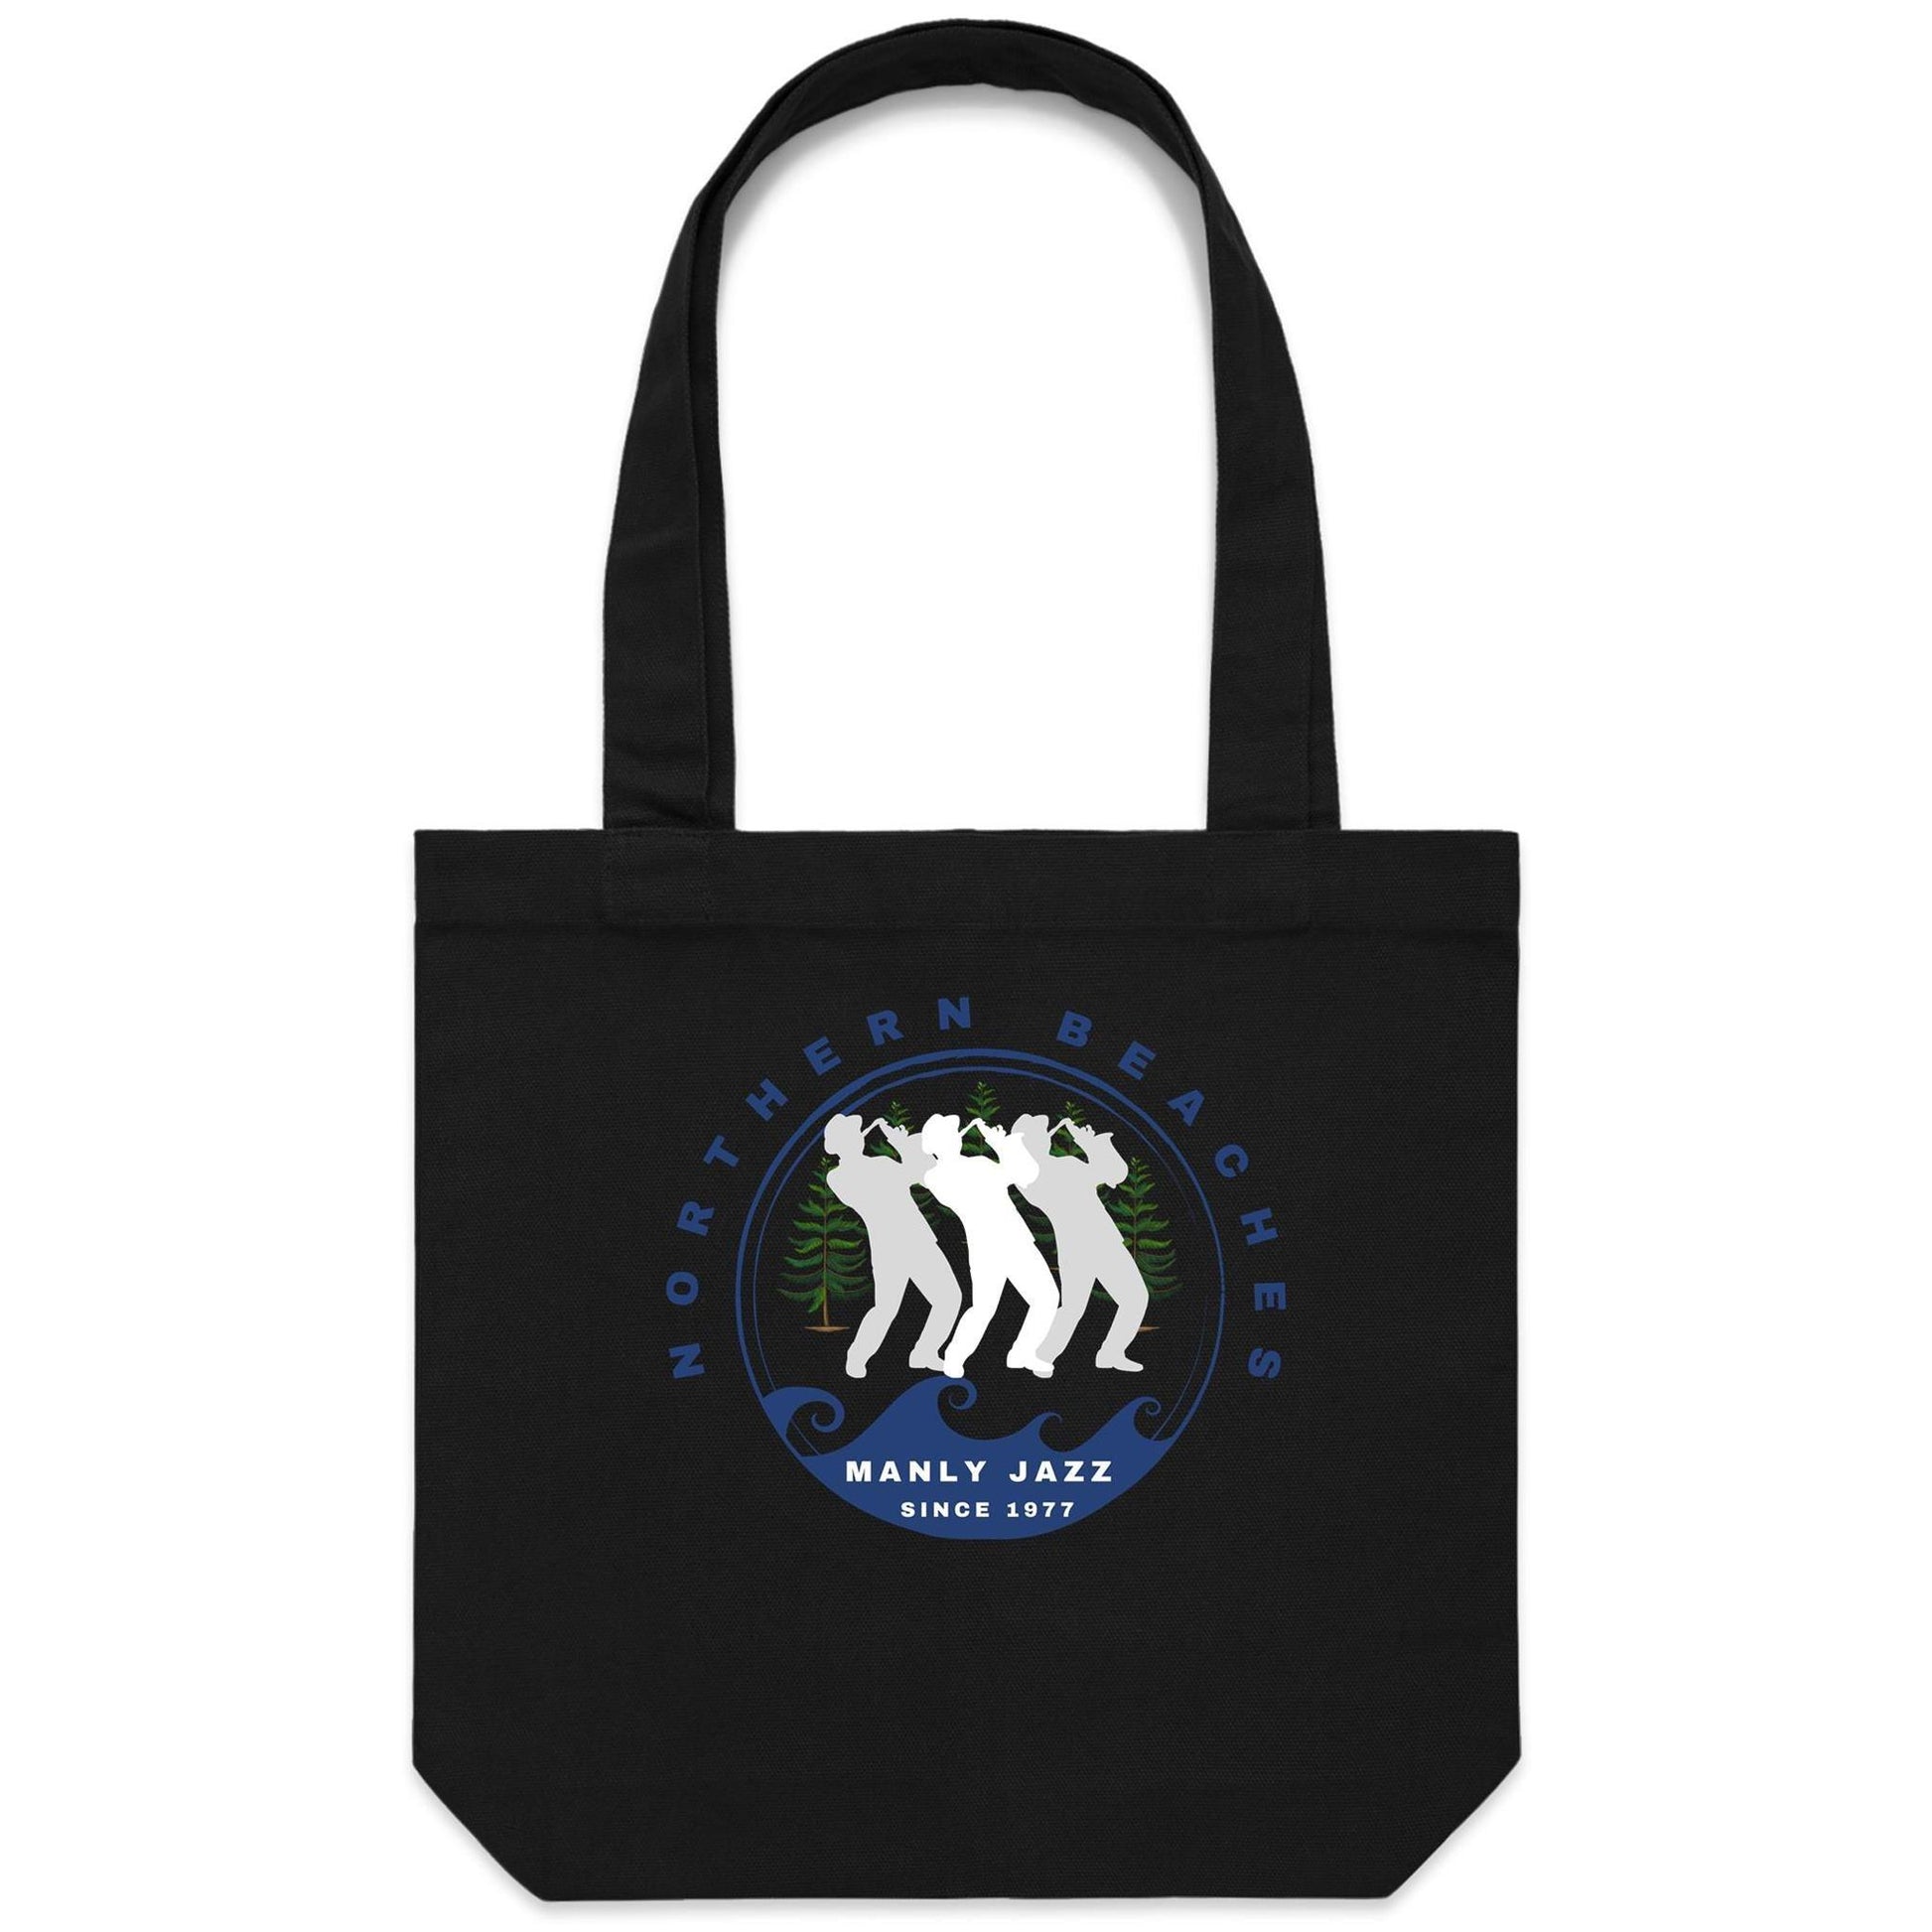 Canvas Tote Bag - Manly Jazz since 1977 logo design - Lost Manly Shop